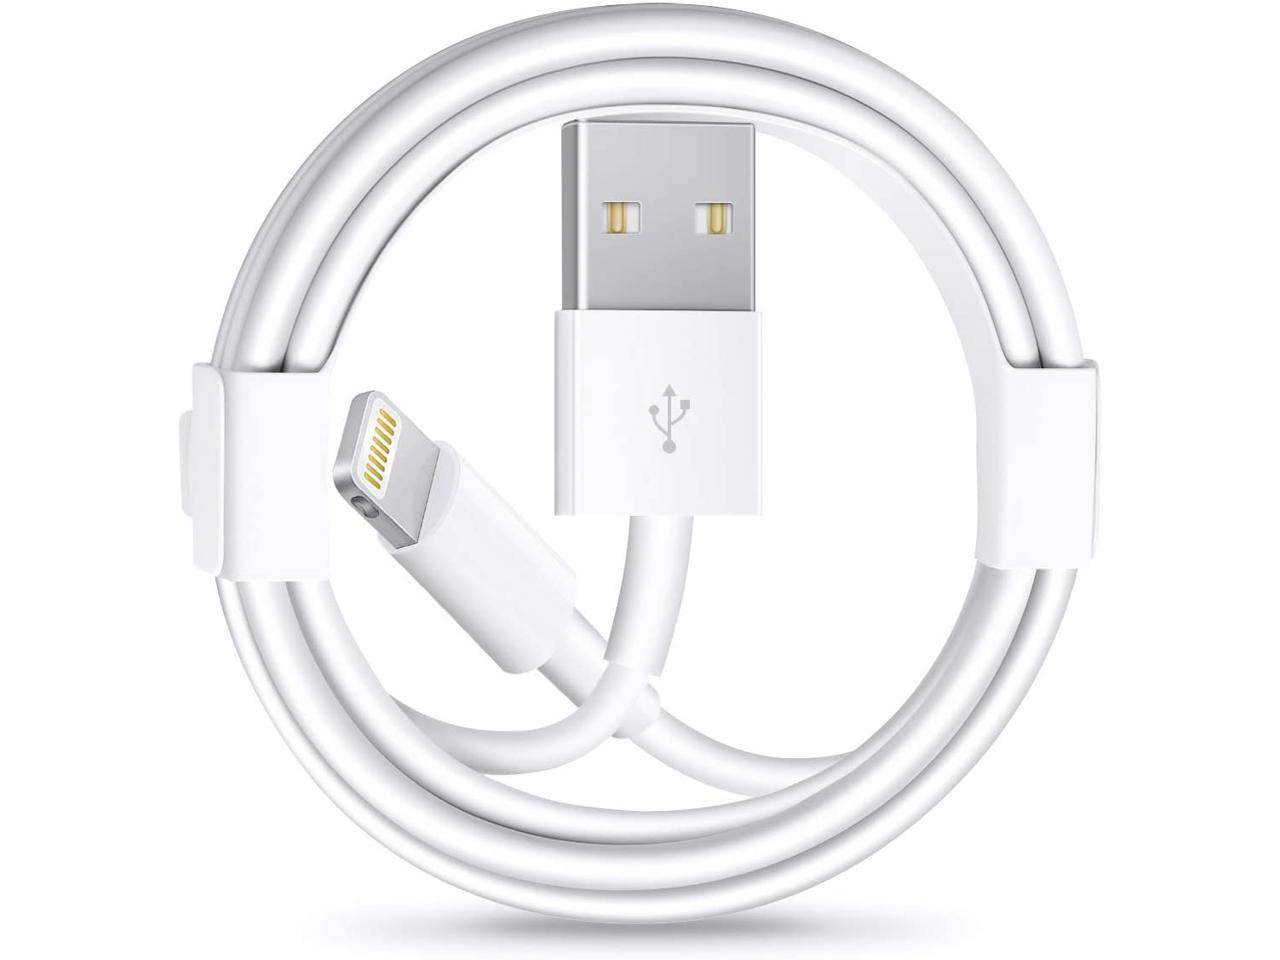 Travel Ready White 2.4a Rapid Power Charge & Sync Apple Certified iPhone Lightning USBC Cable 3 ft for iPhone 12 Pro Max Mini 11 X XS XR XS Max 8 Plus 8 7 Plus 7 iPad Pro iPad Air 